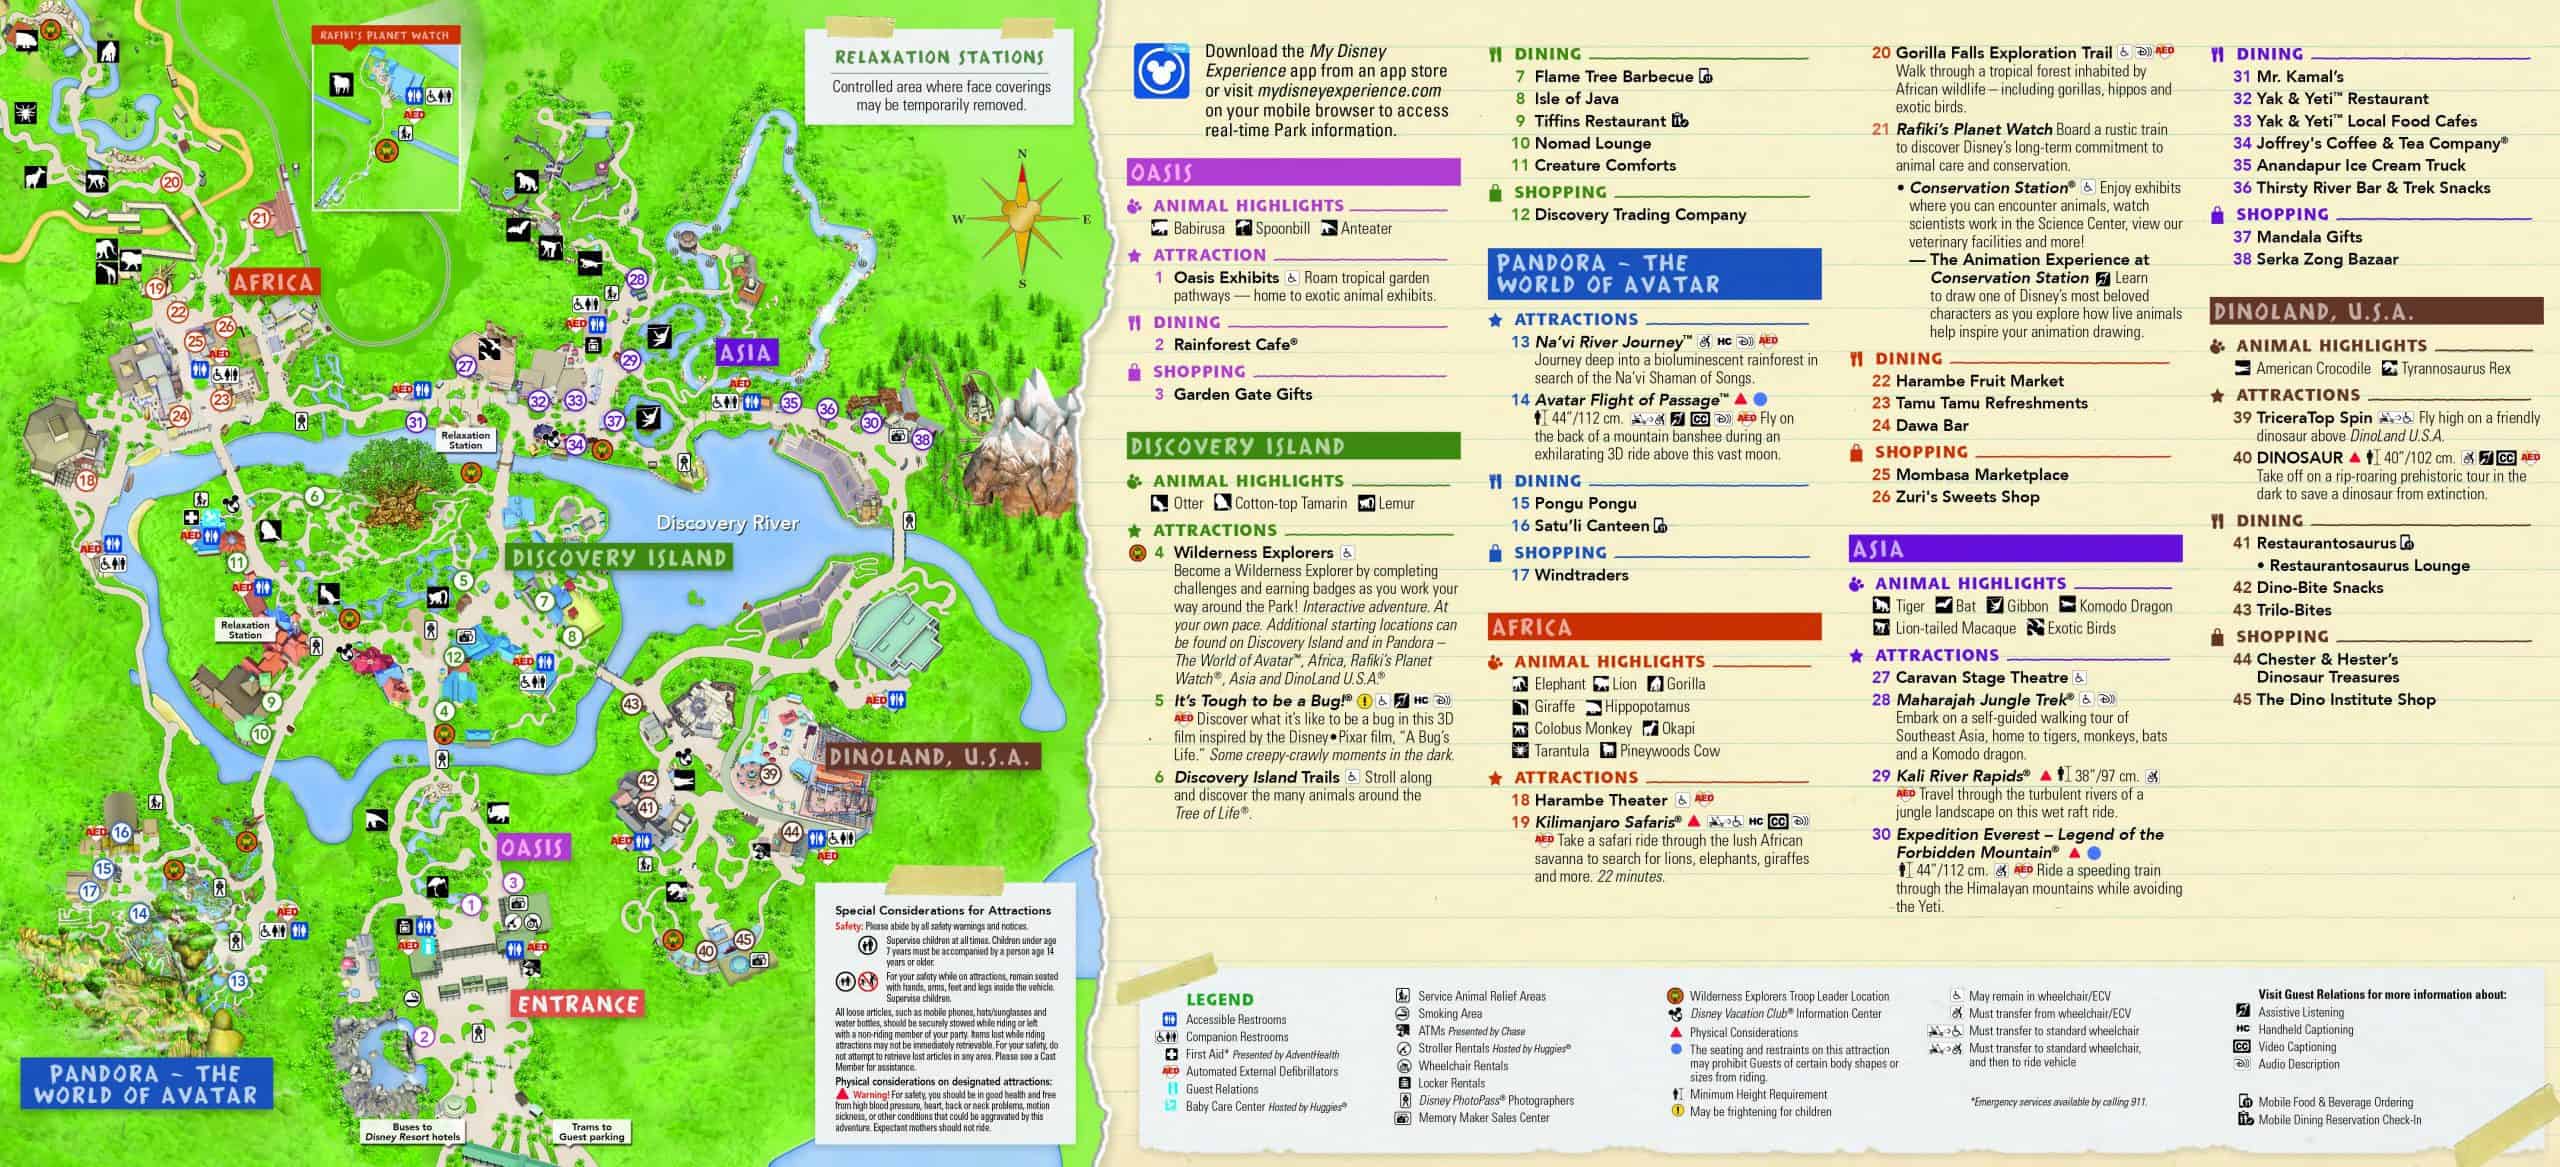 Complete Guide to Animal Kingdom at Disney World - WDW Prep School